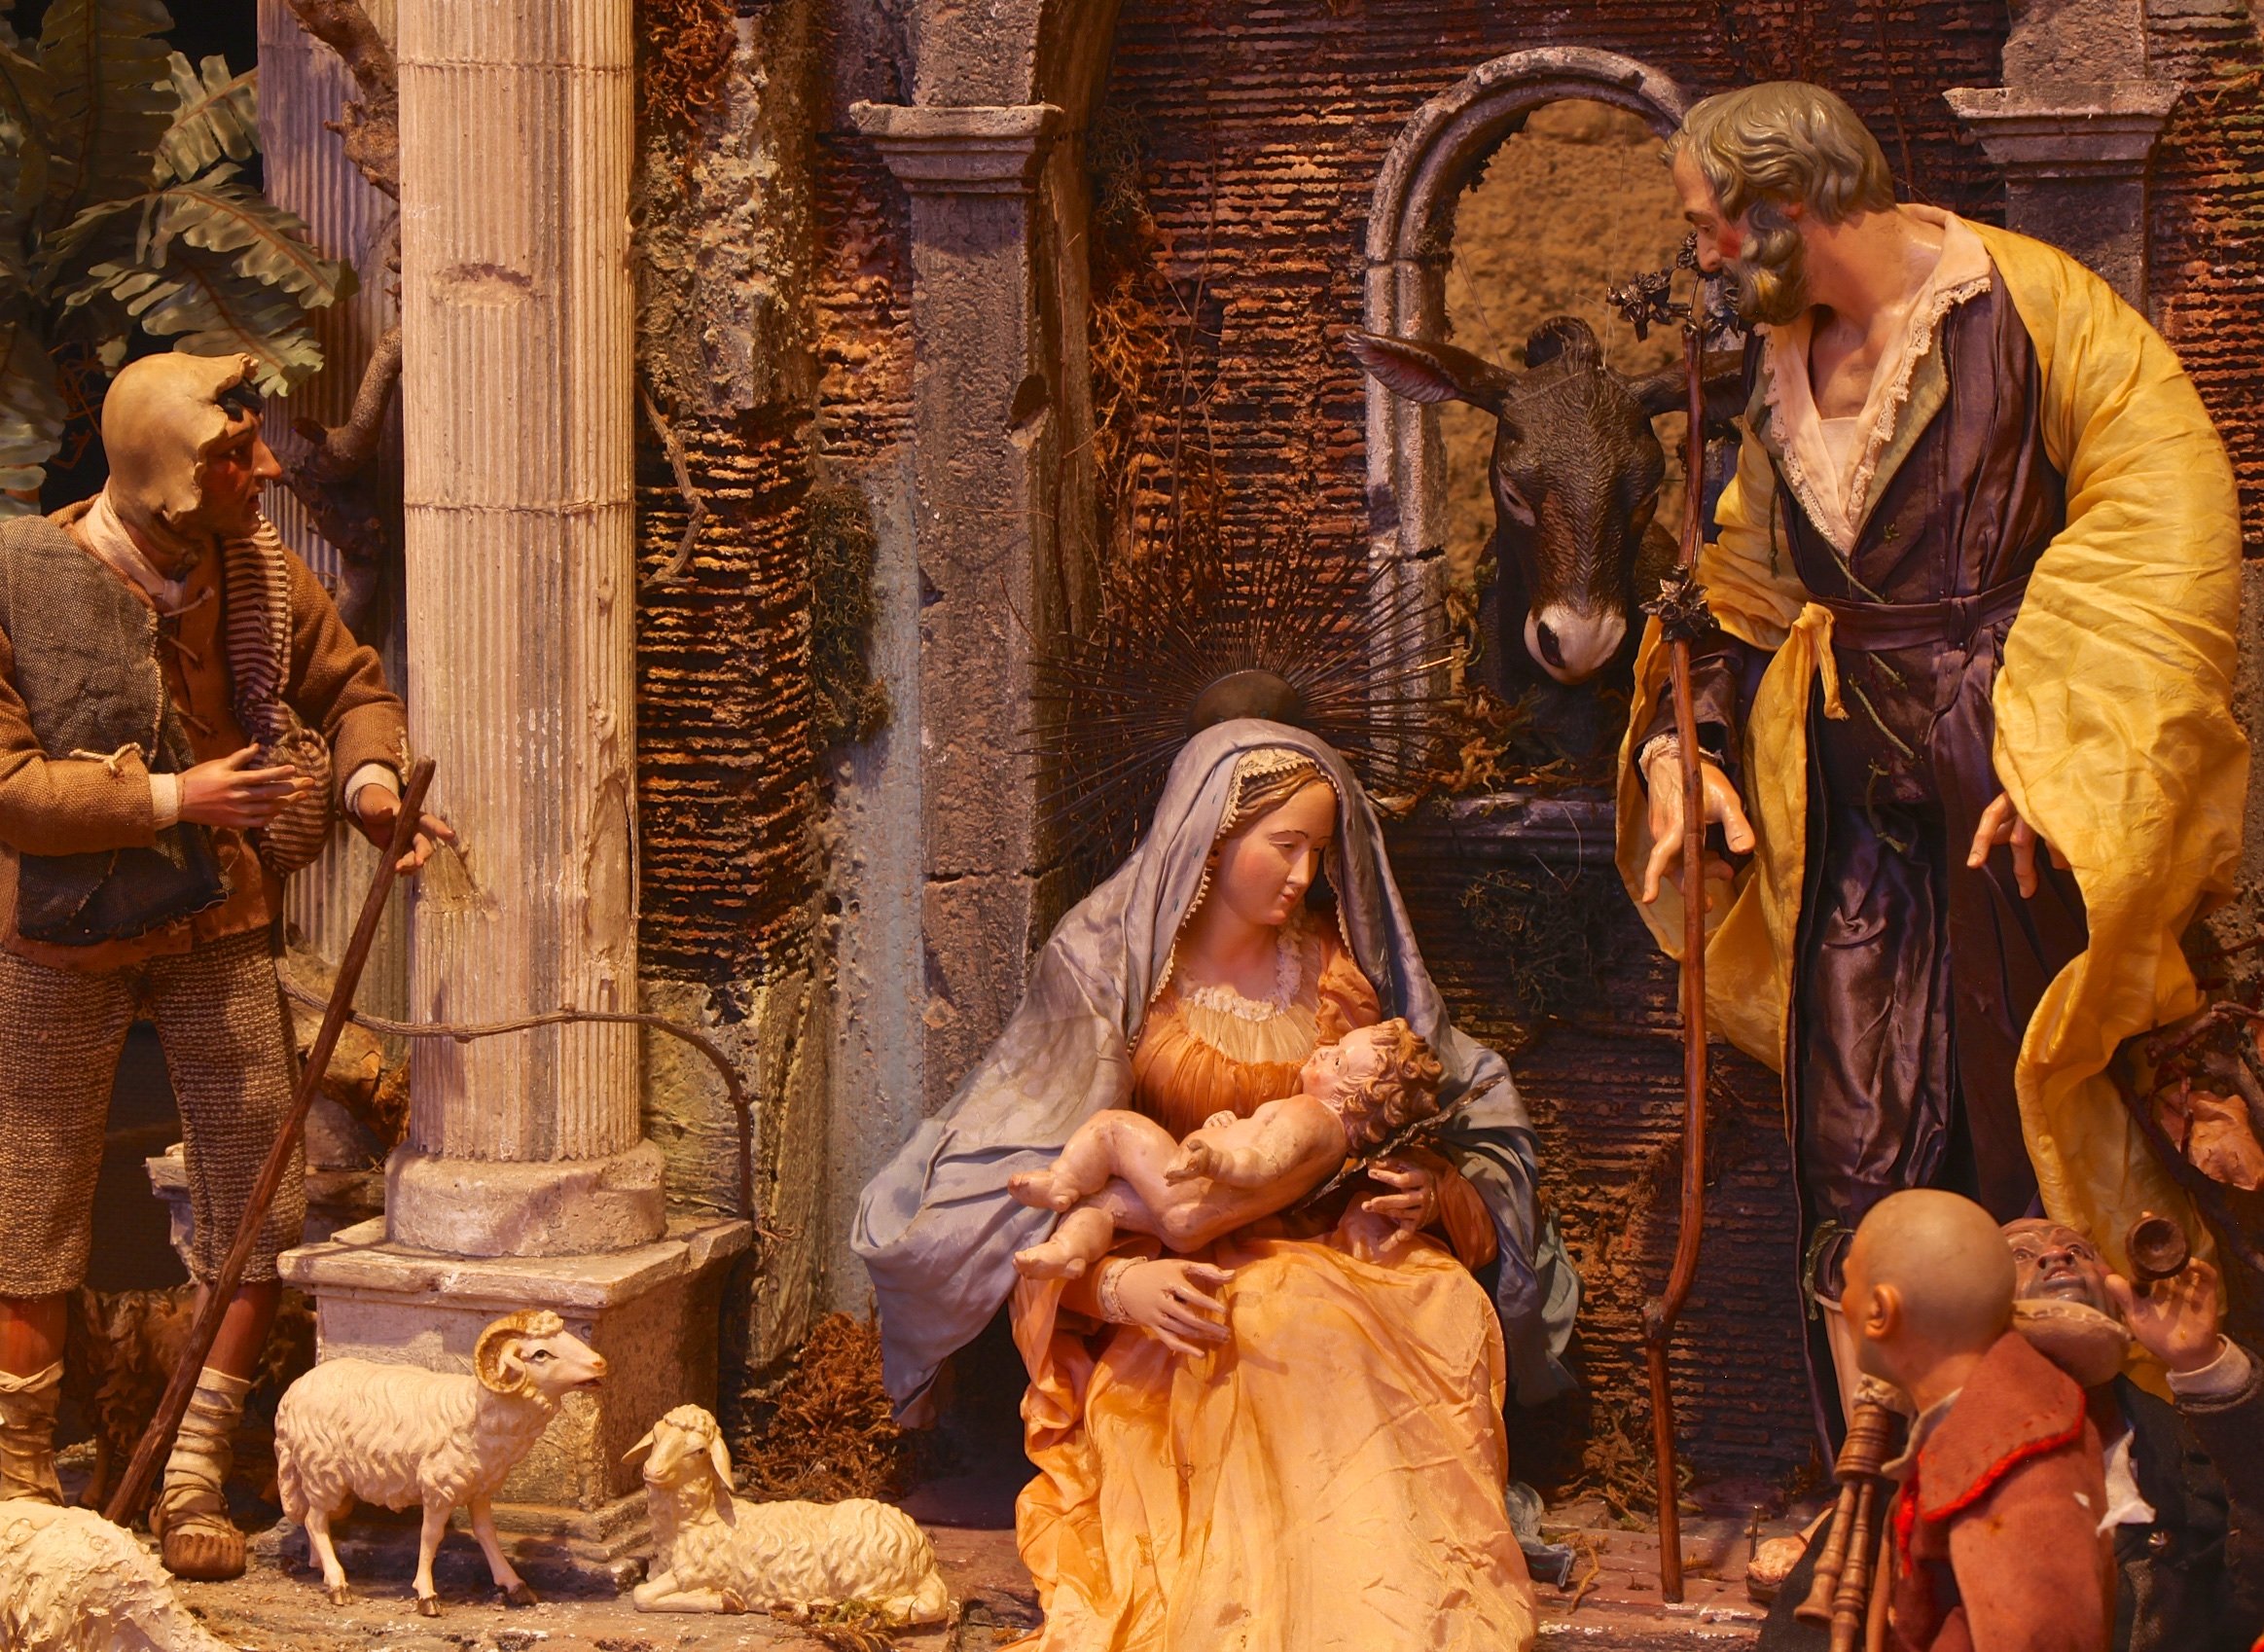  This detail of a Neapolitan Presepio shows the Holy Family amongst stone building ruins. A man can be seen from behind, while in the back a donkey looks on through a window. 